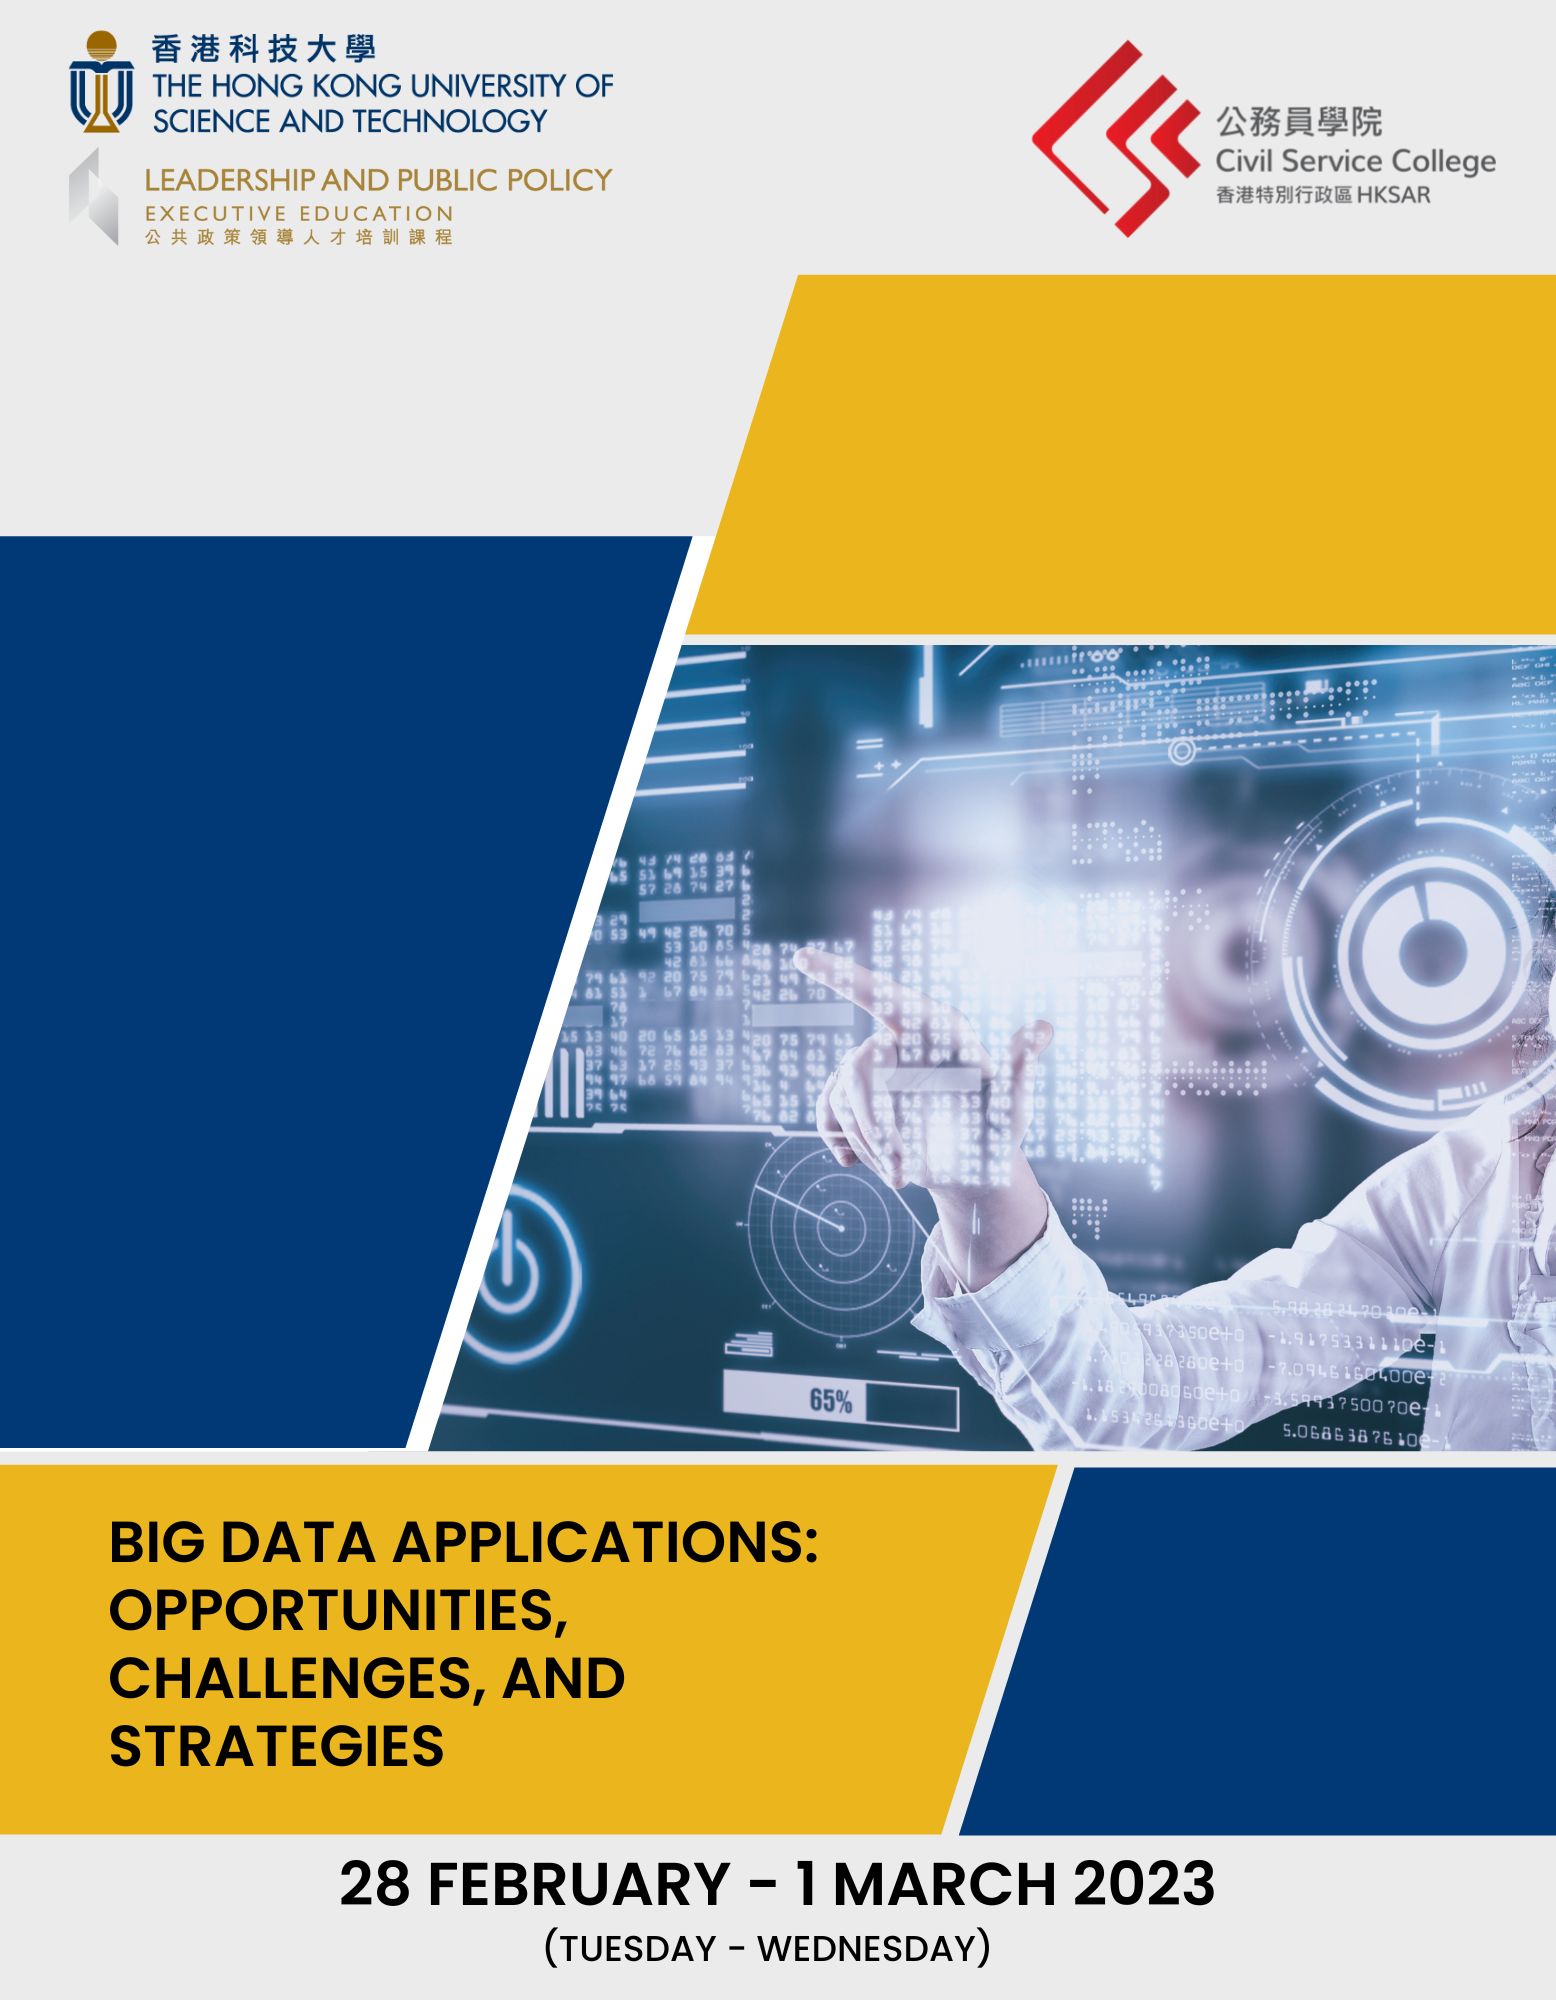 Big Data Applications Opportunities, Challenges, and Strategies (28